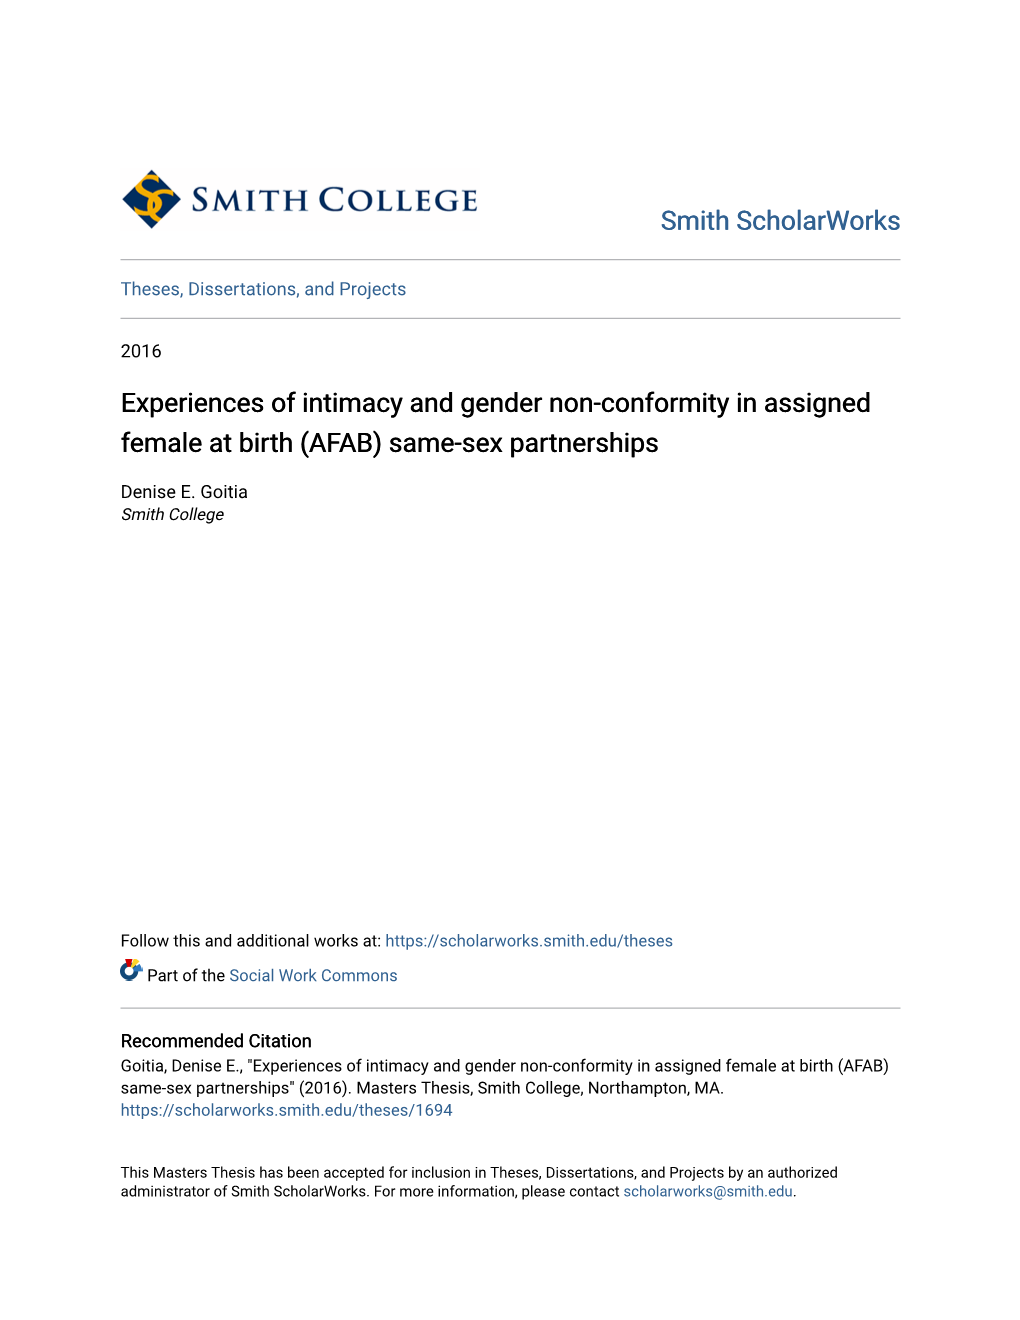 Experiences of Intimacy and Gender Non-Conformity in Assigned Female at Birth (AFAB) Same-Sex Partnerships